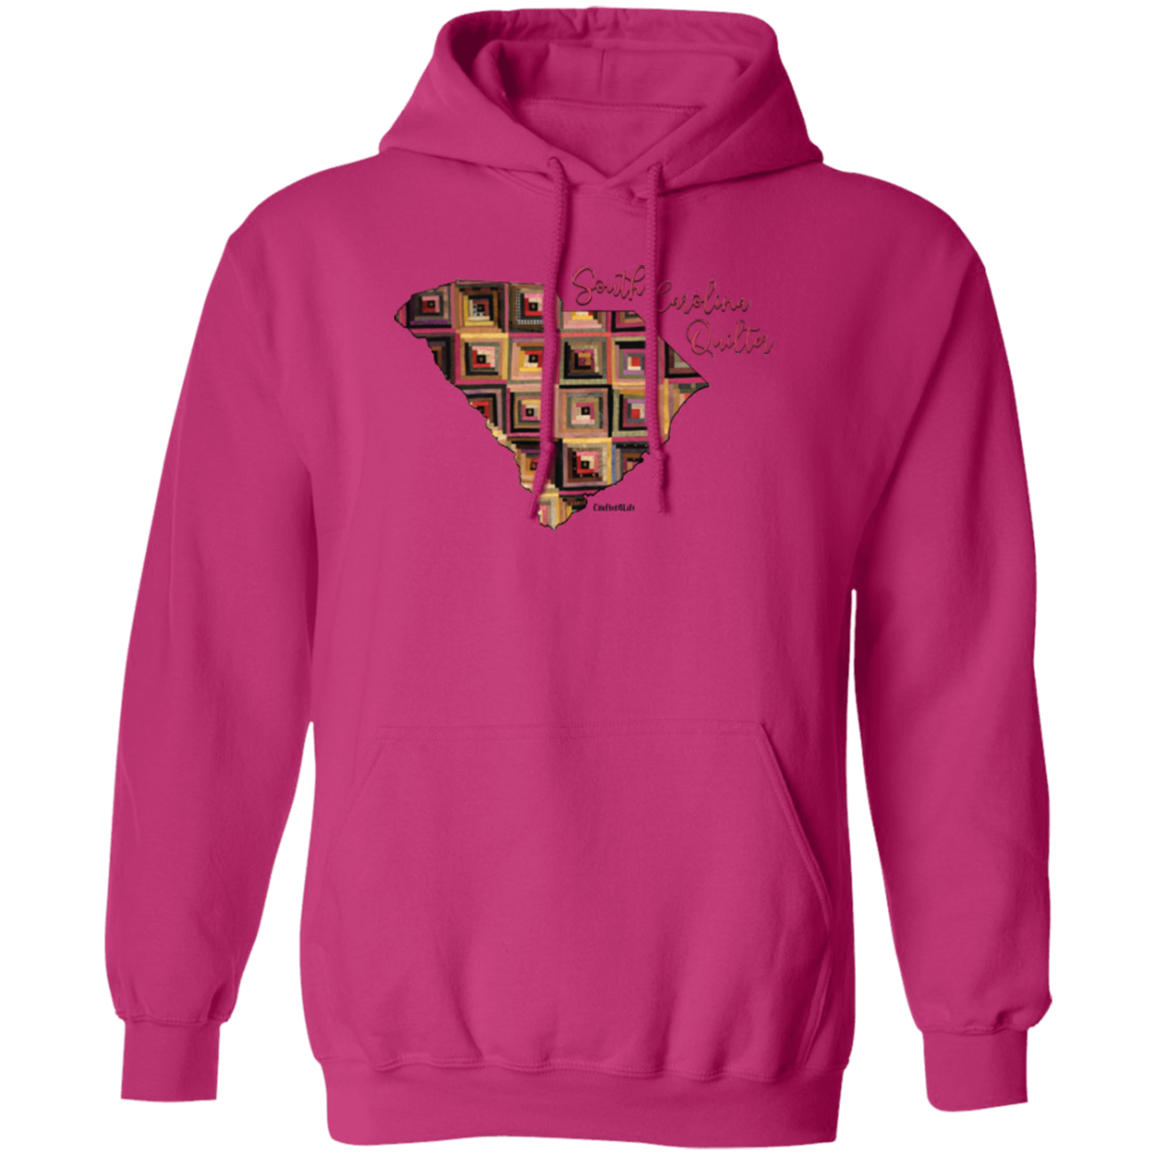 South Carolina Quilter Pullover Hoodie, Gift for Quilting Friends and Family